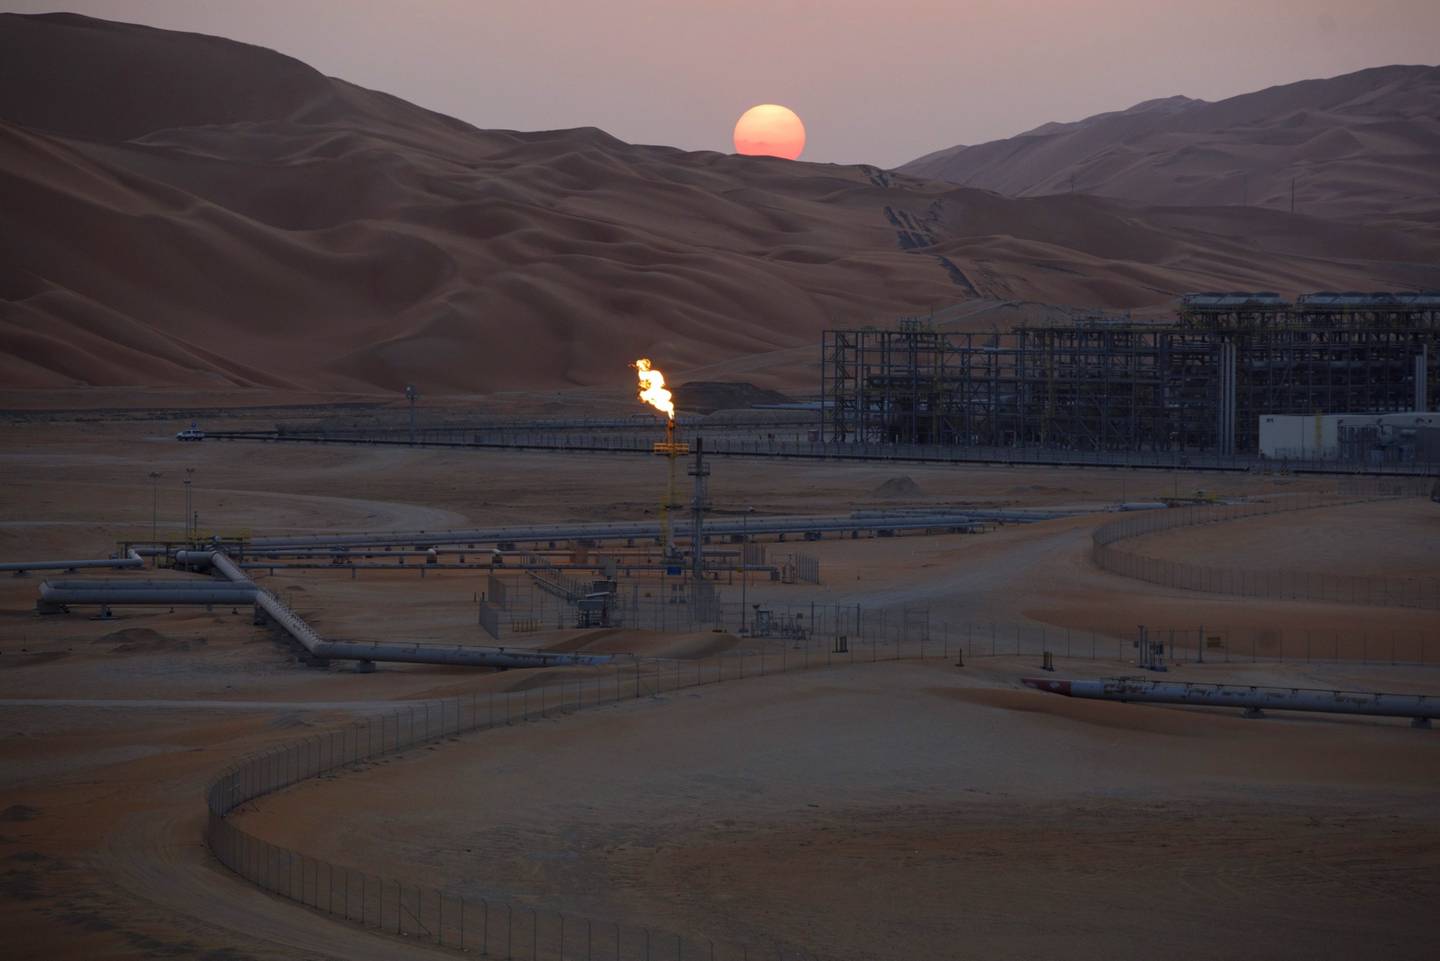 A flame burns from a stack at the oil processing facility at Saudi Aramco's Shaybah oil field in the Rub' Al-Khali desert, also known as the 'Empty Quarter,' in Shaybah, Saudi Arabia, on Tuesday, Oct. 2, 2018. Saudi Arabia is seeking to transform its crude-dependent economy by developing new industries, and is pushing into petrochemicals as a way to earn more from its energy deposits. Photographer: Simon Dawson/Bloomberg